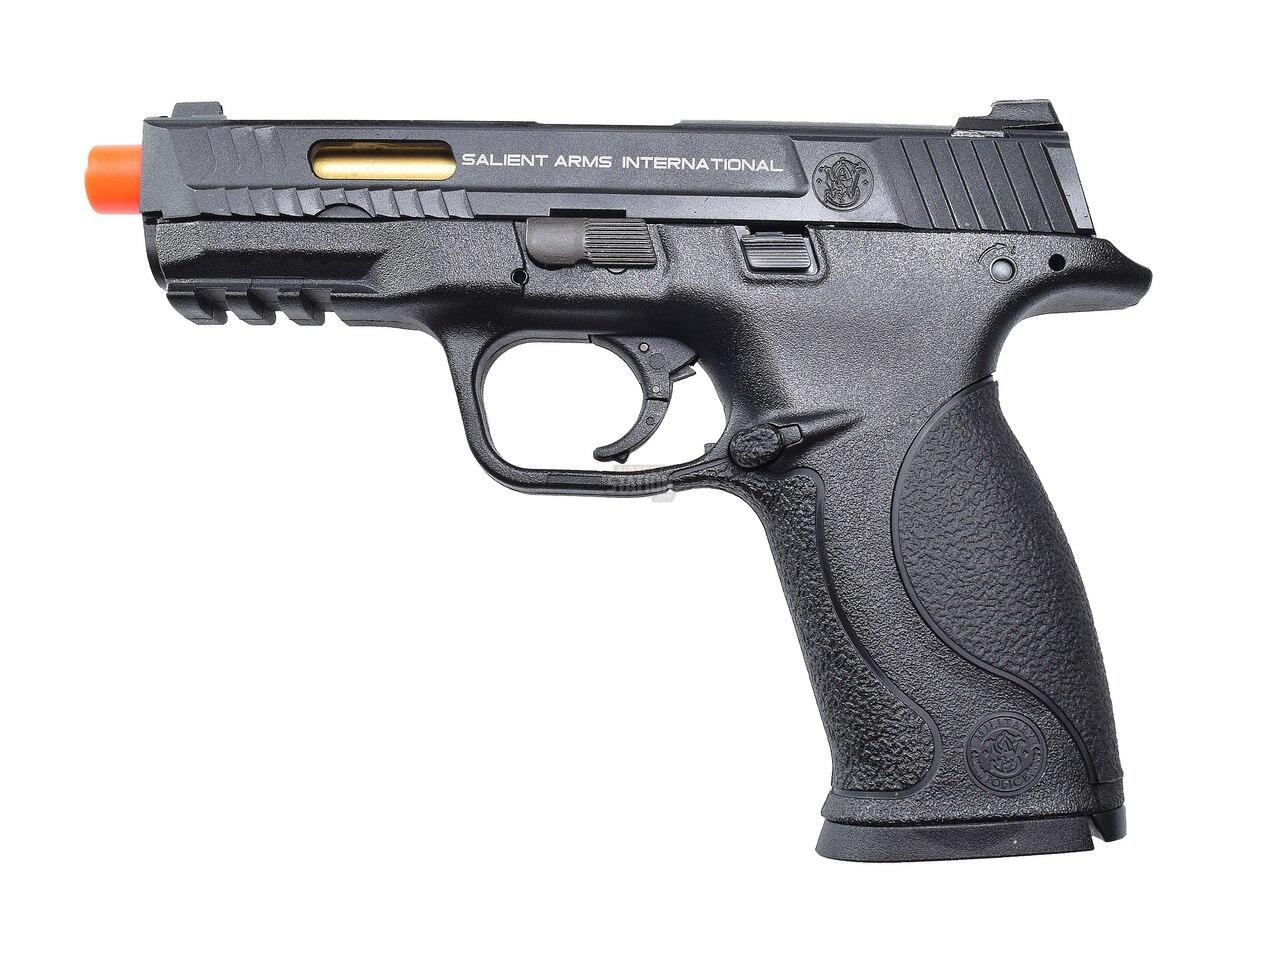 Salient Arms International Smith And Wesson Mandp 9 Full Size Fullsemi Auto Gas Blowback Airsoft 6035